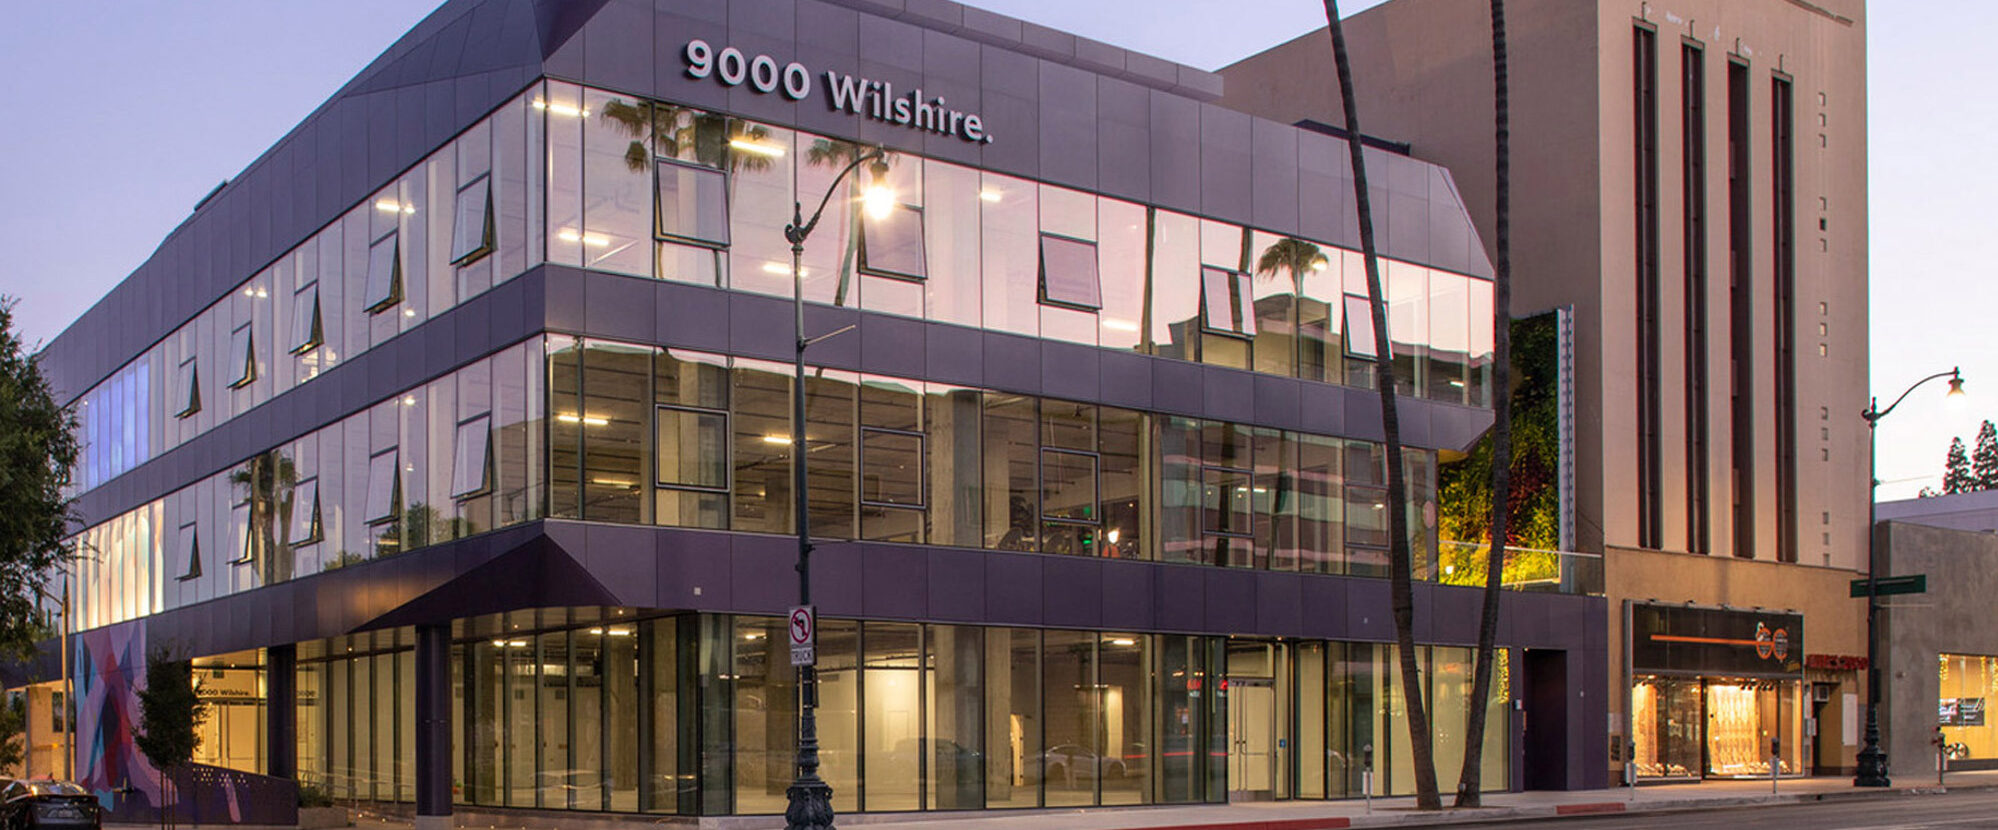 Modern commercial building at twilight with reflective glass facade and cantilevered upper stories. Exterior lighting accentuates the geometric lines and the mix of metal and glass materials used.